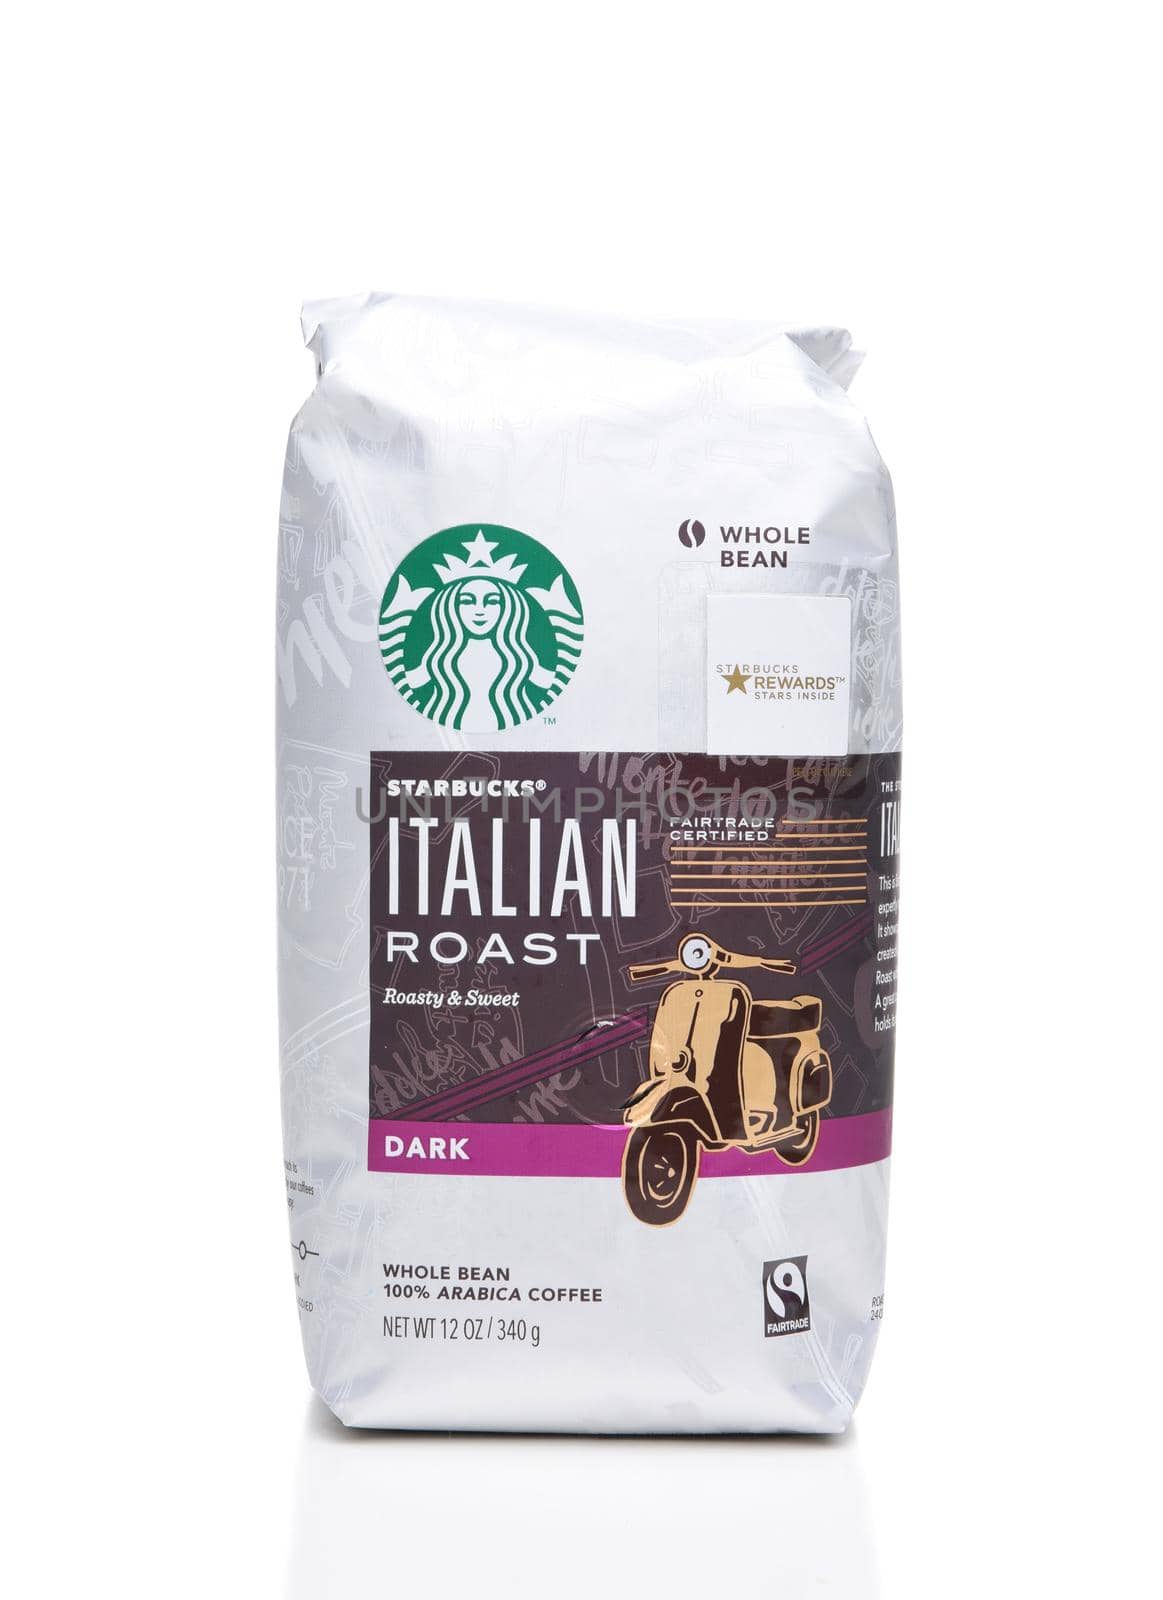 IRVINE, CA - AUGUST 6, 2018: A 40 ounce bag of Starbucks Italian Roast Coffee Beans. Seattle based Starbucks is the largest coffeehouse company in the world, with over 20,000 stores in 62 countries.